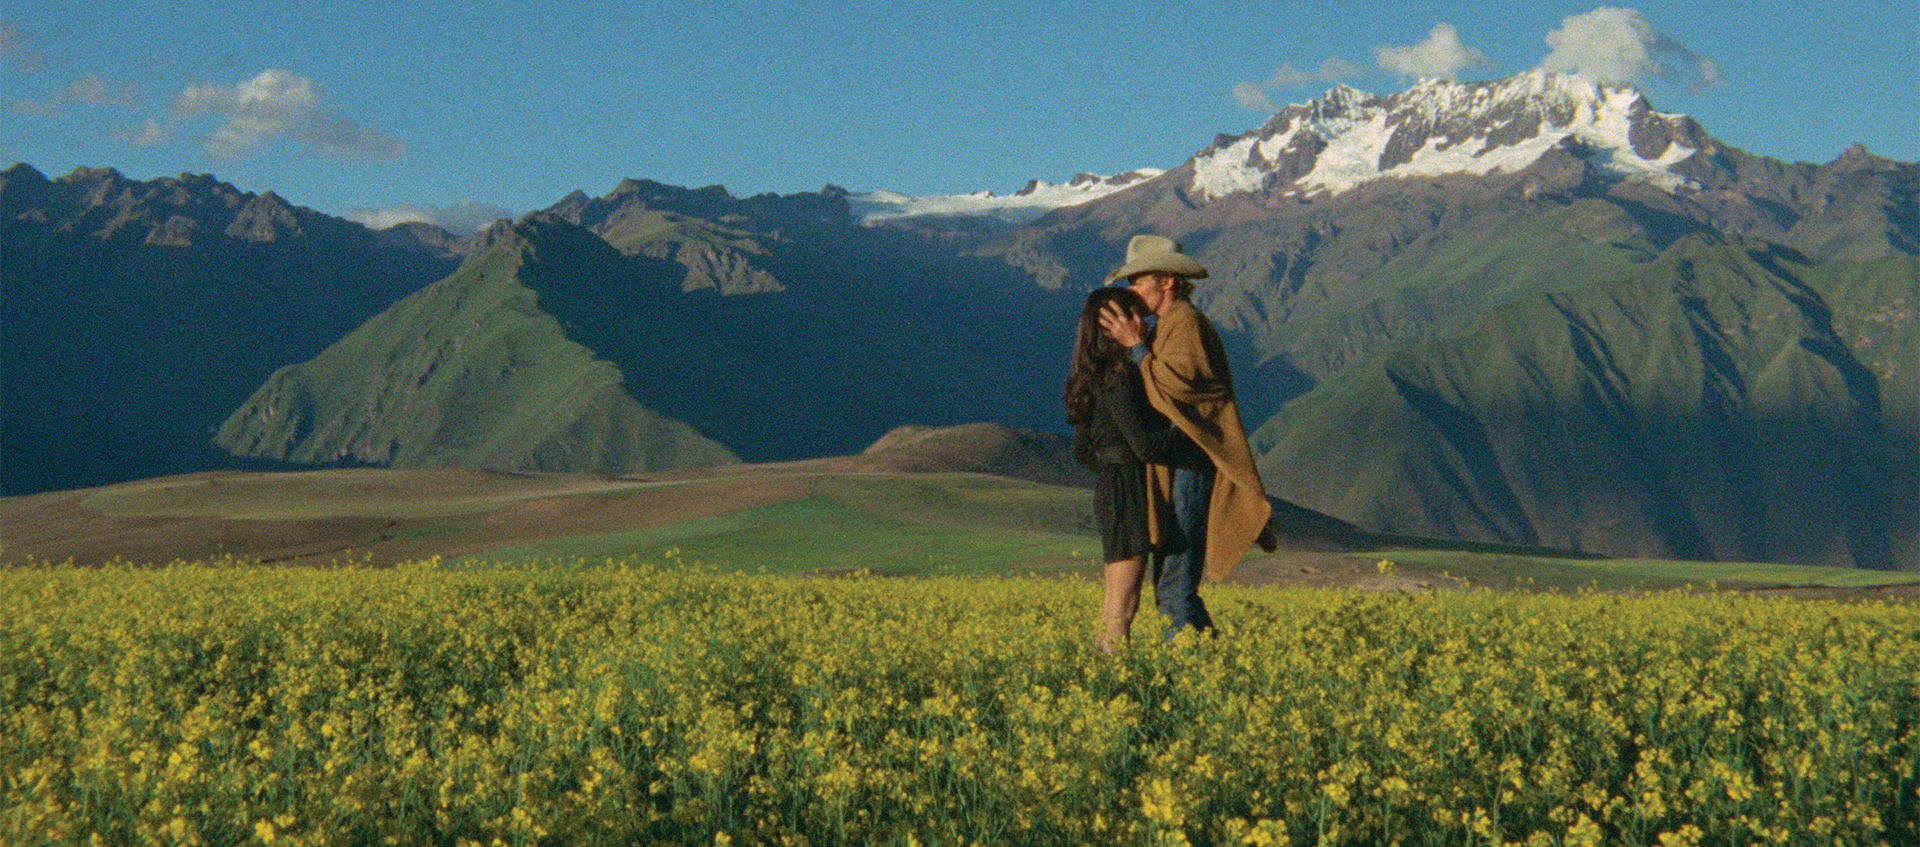 Two people standing in the middle of a prairie with snow capped mountains in the background